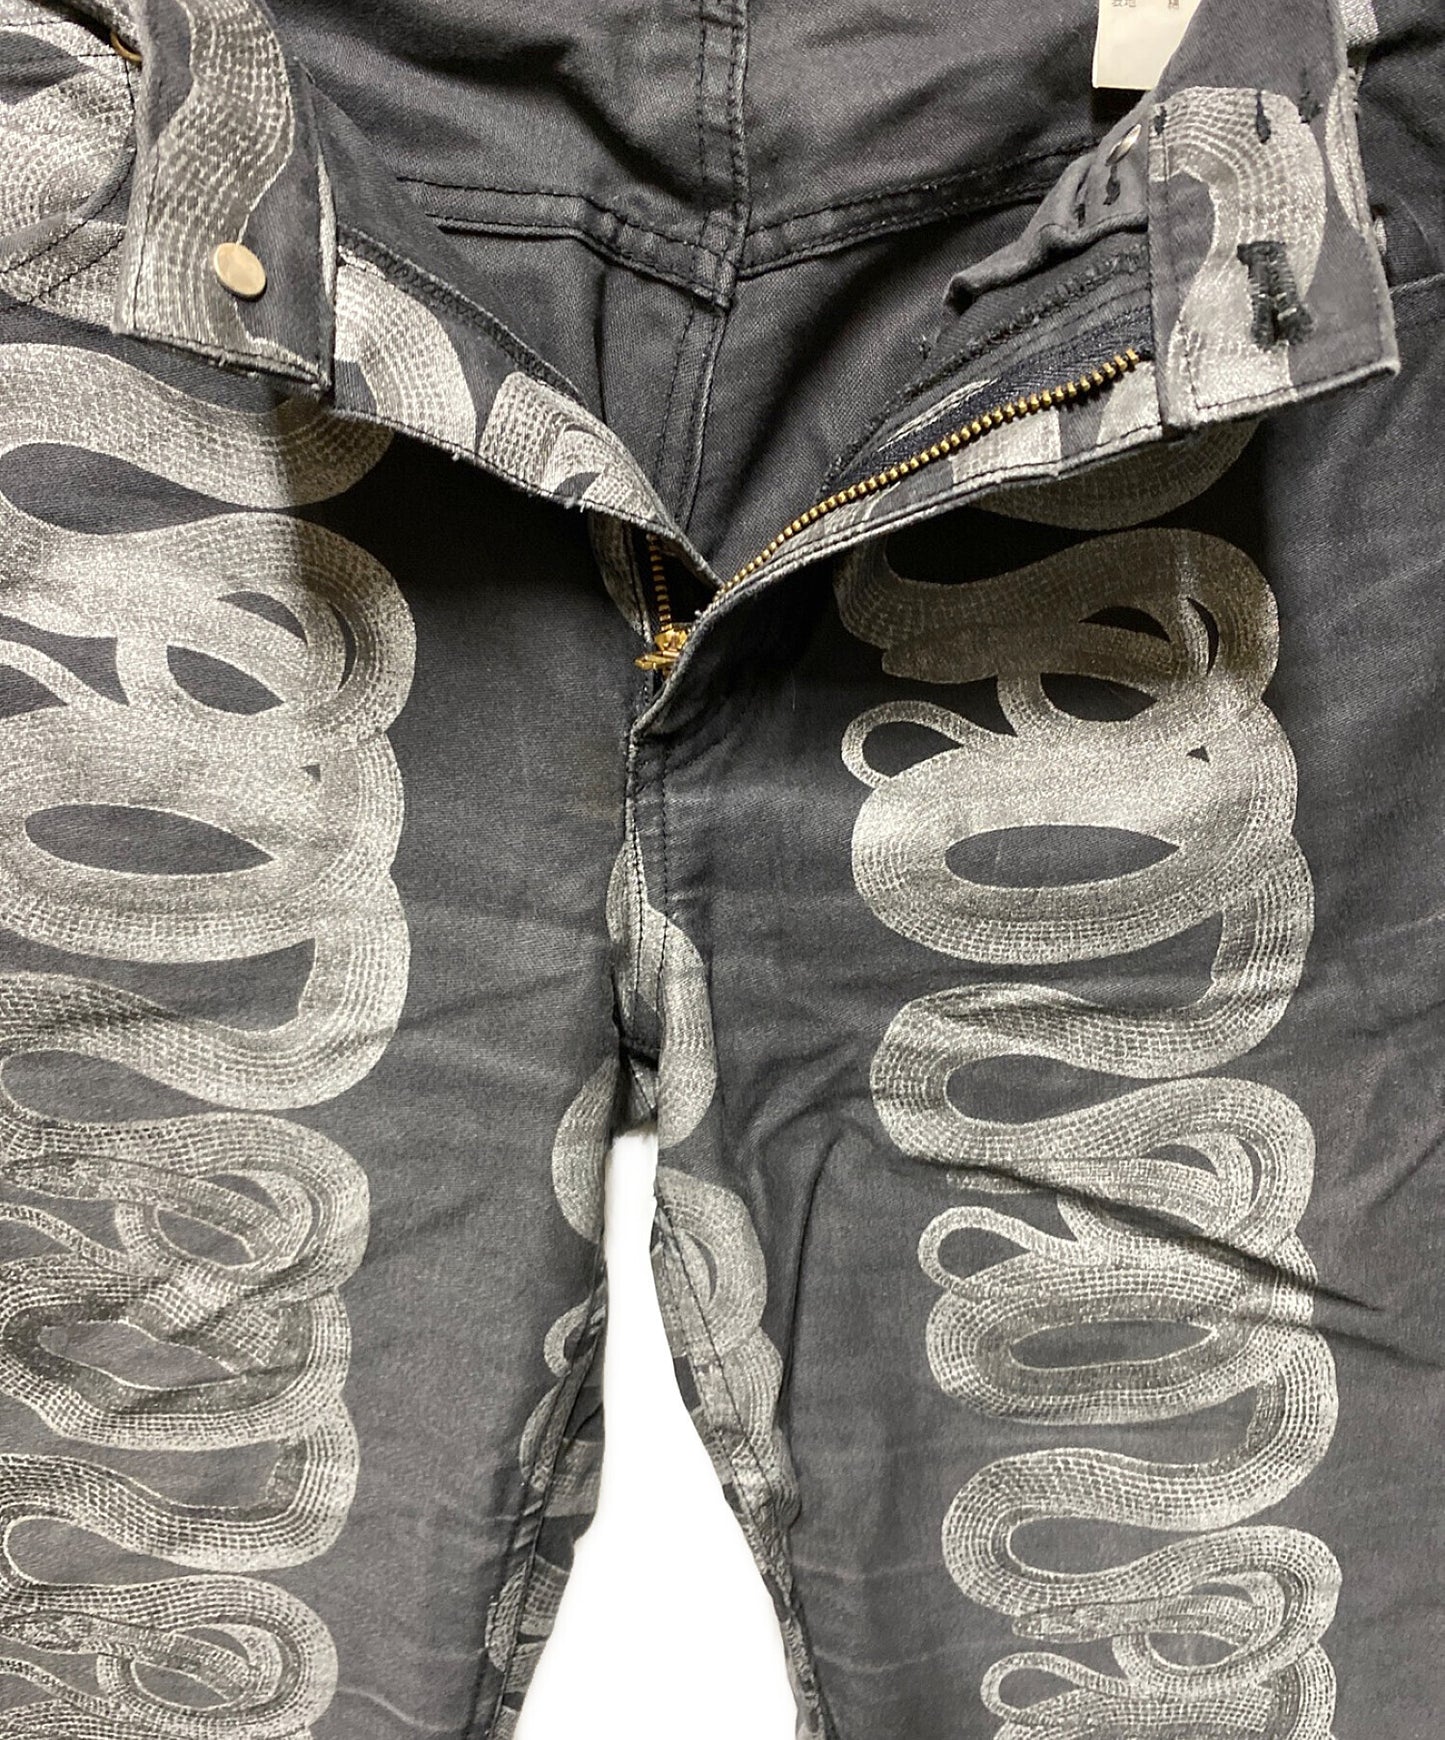 [Pre-owned] Hysteric Glamour Snake Flare Pants 3AP-2593